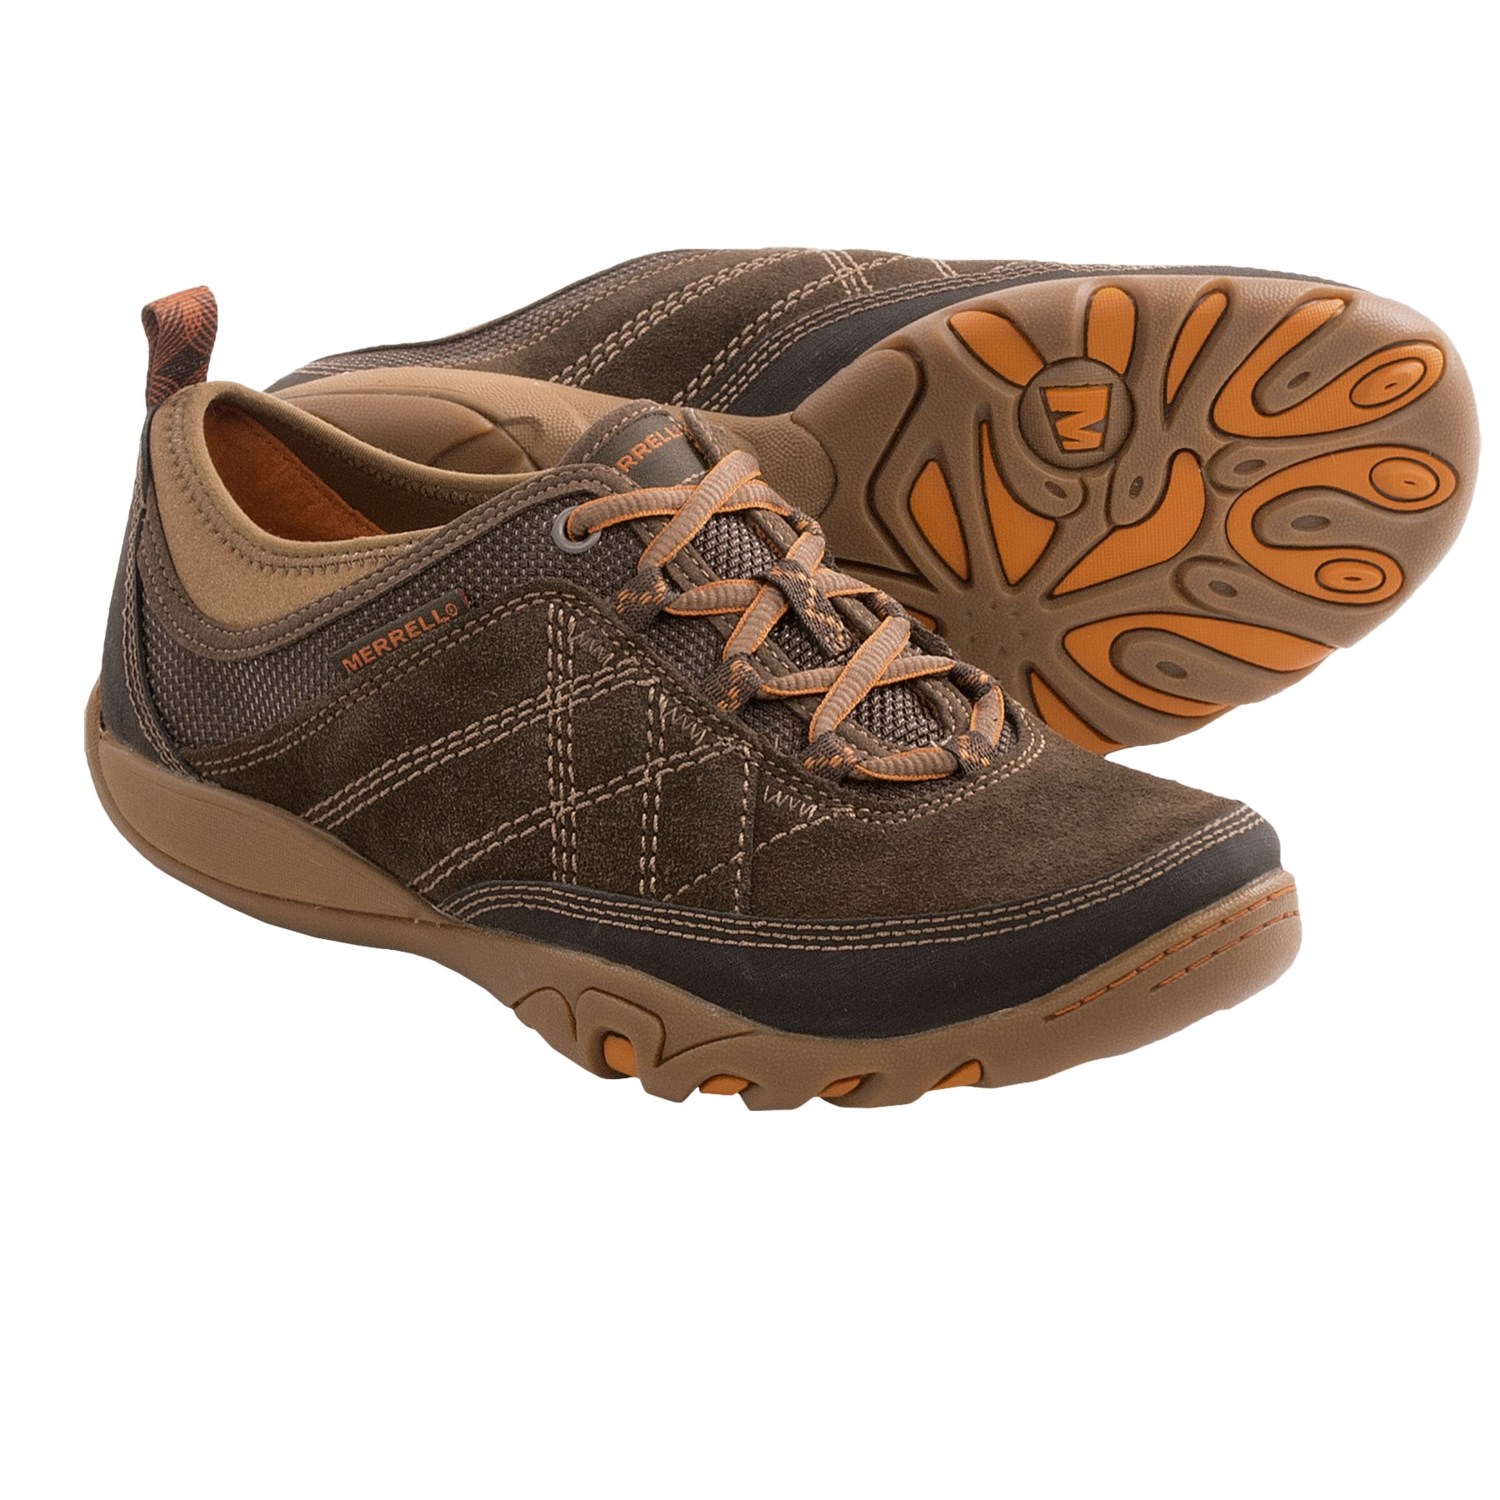 Merrell Mimosa Glee Shoes (For Women) - Save 52%